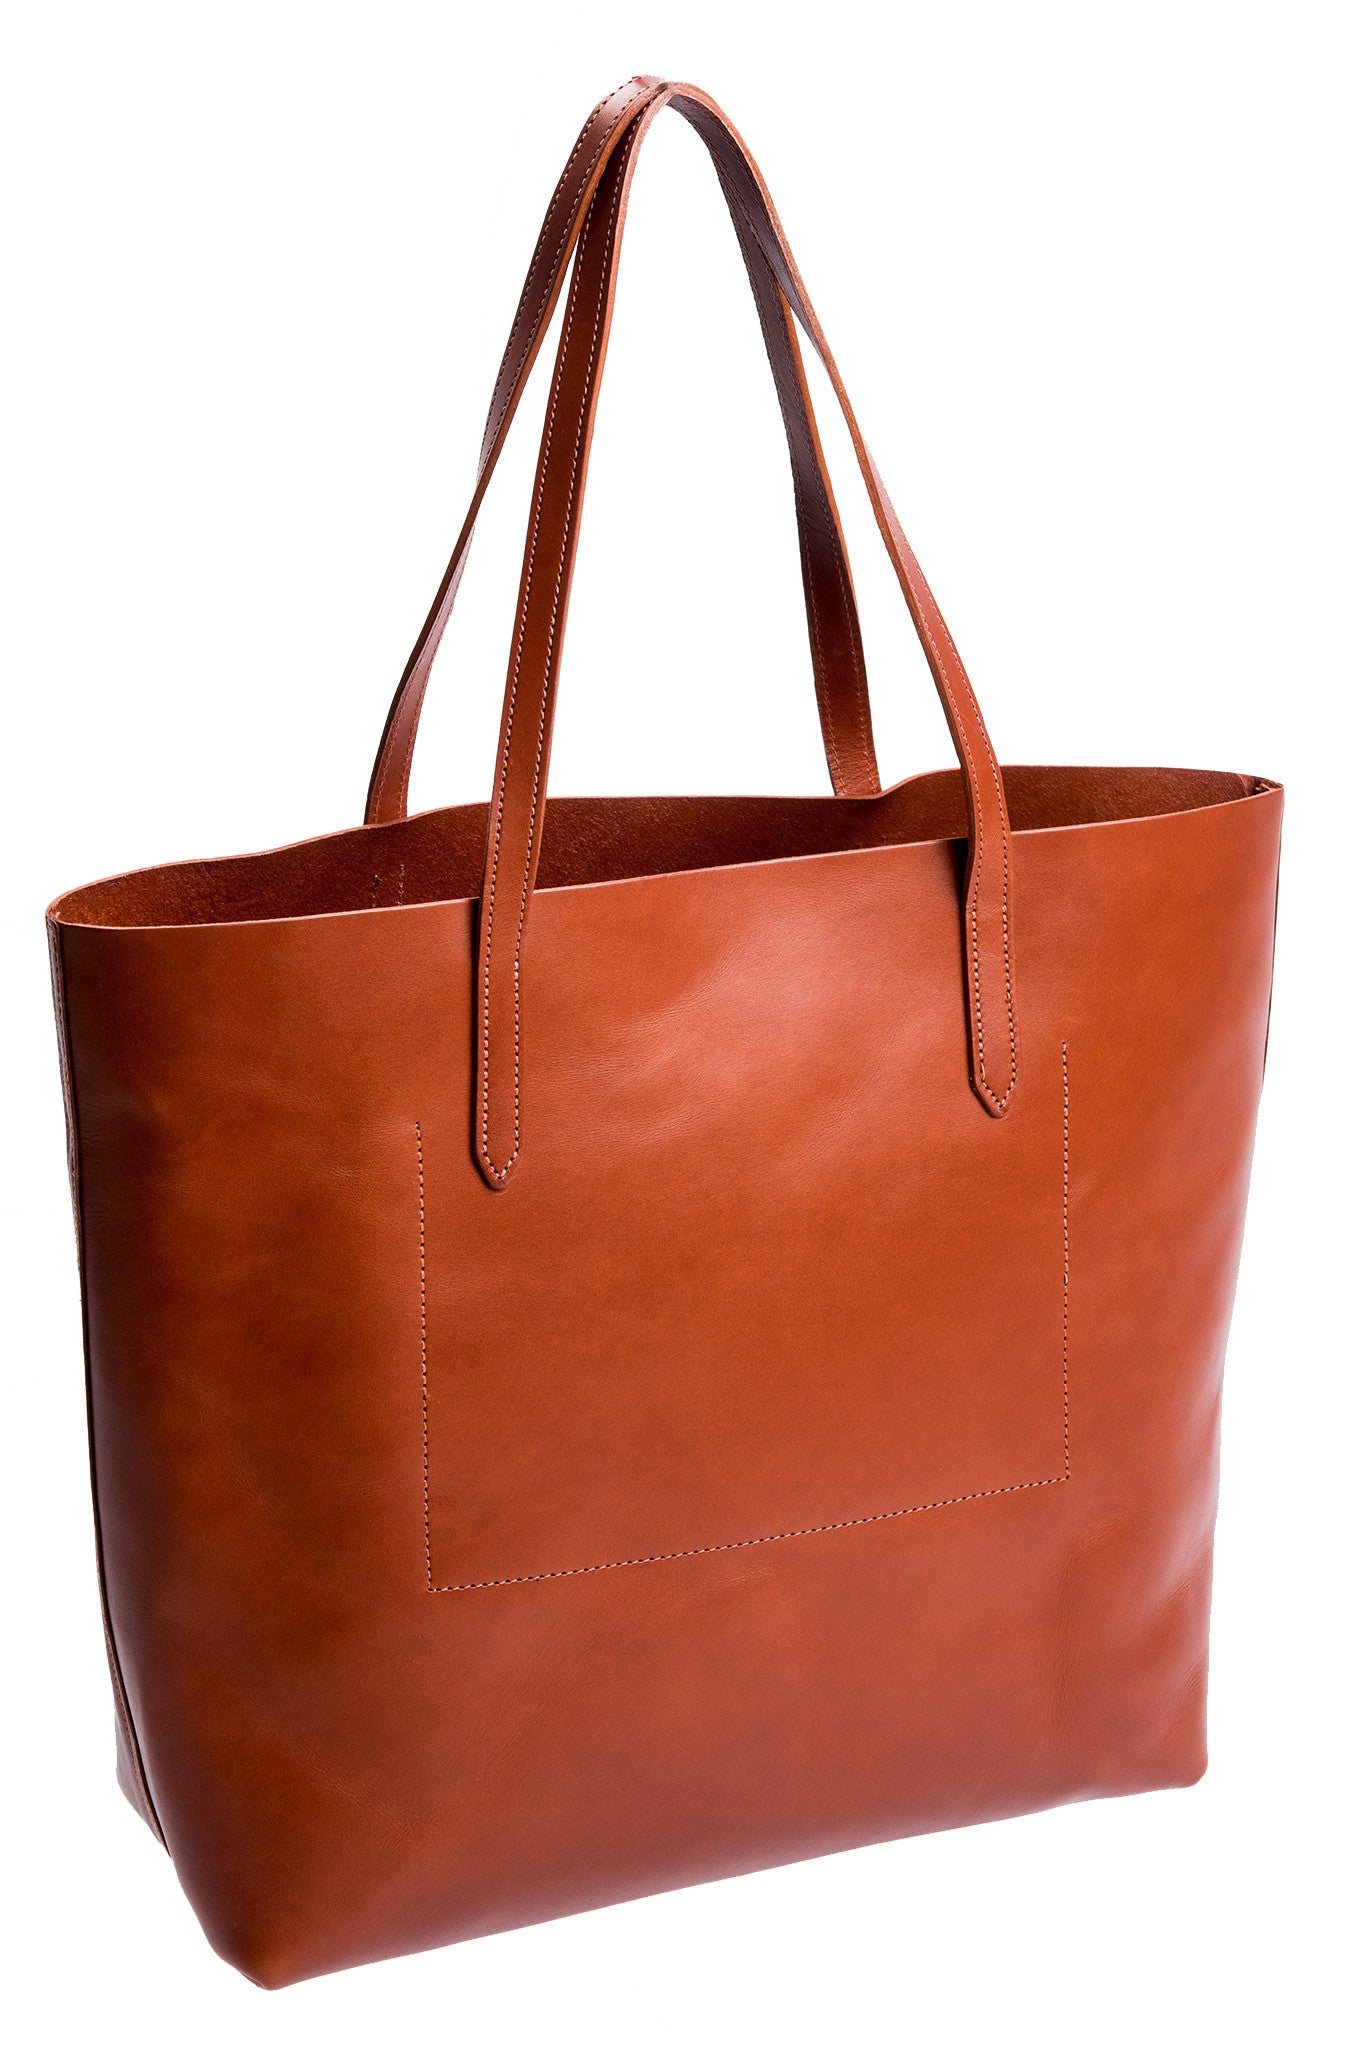 FOTO | Highland Leather Tote in Cognac - Personalized Tote | FOTO